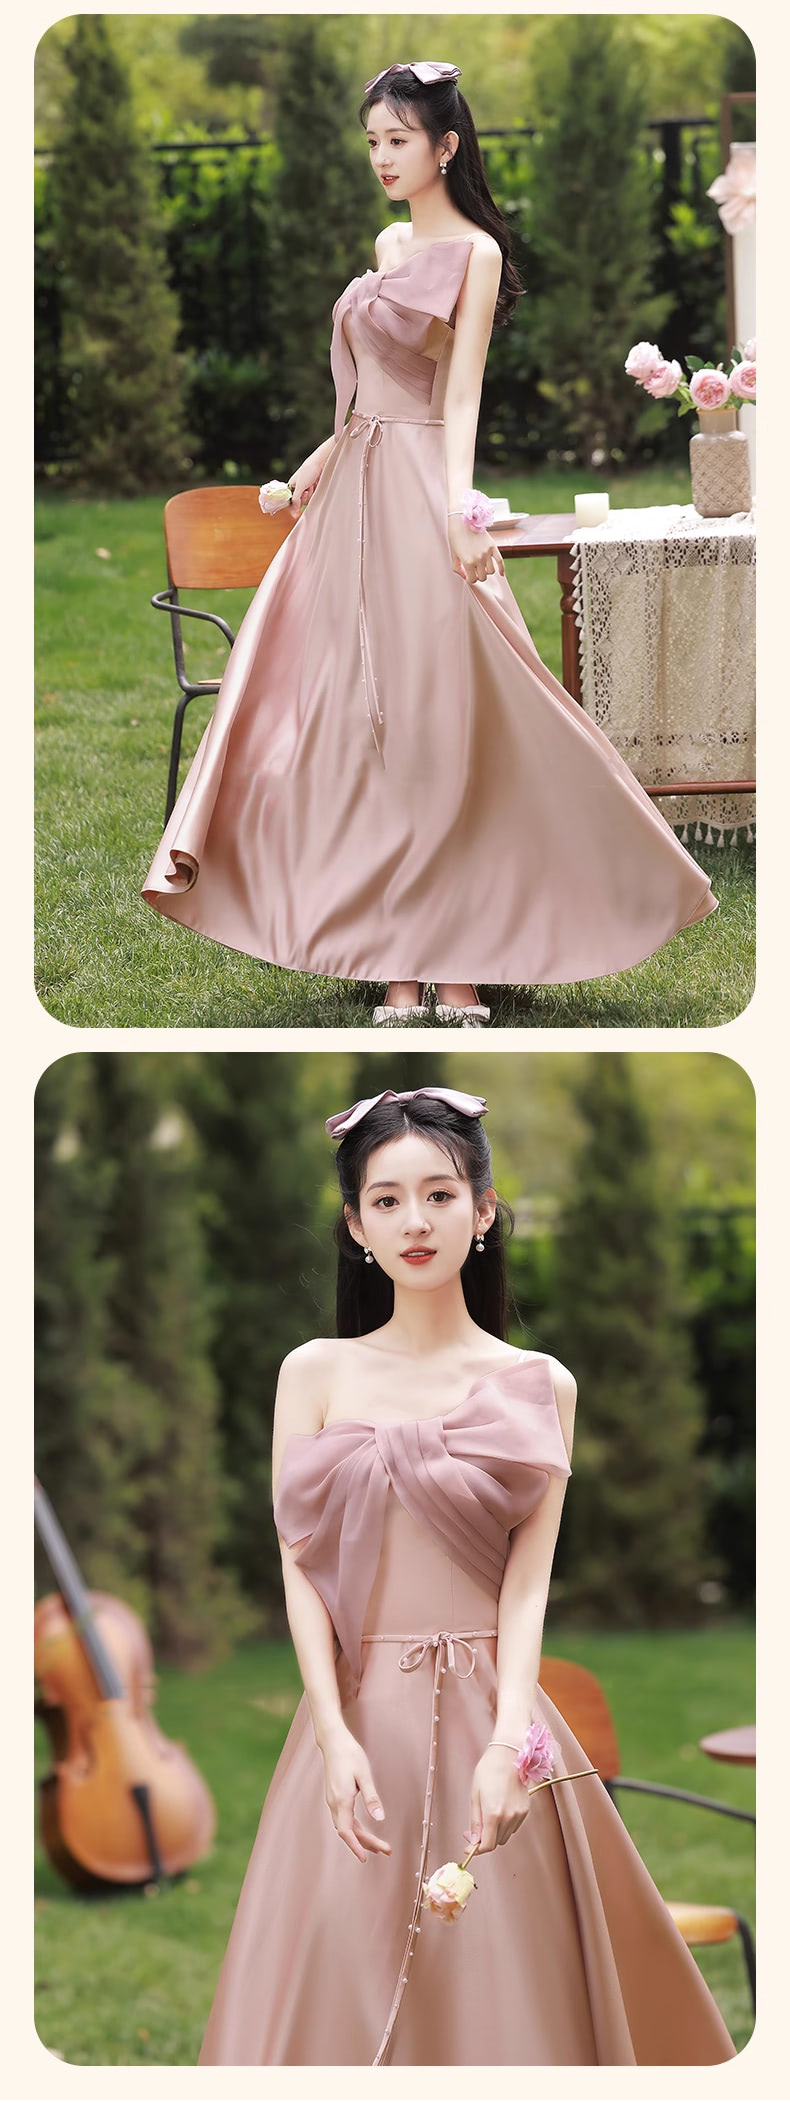 Sweet-Pink-Satin-Bridesmaid-Dress-Wedding-Prom-Guest-Formal-Outfit27